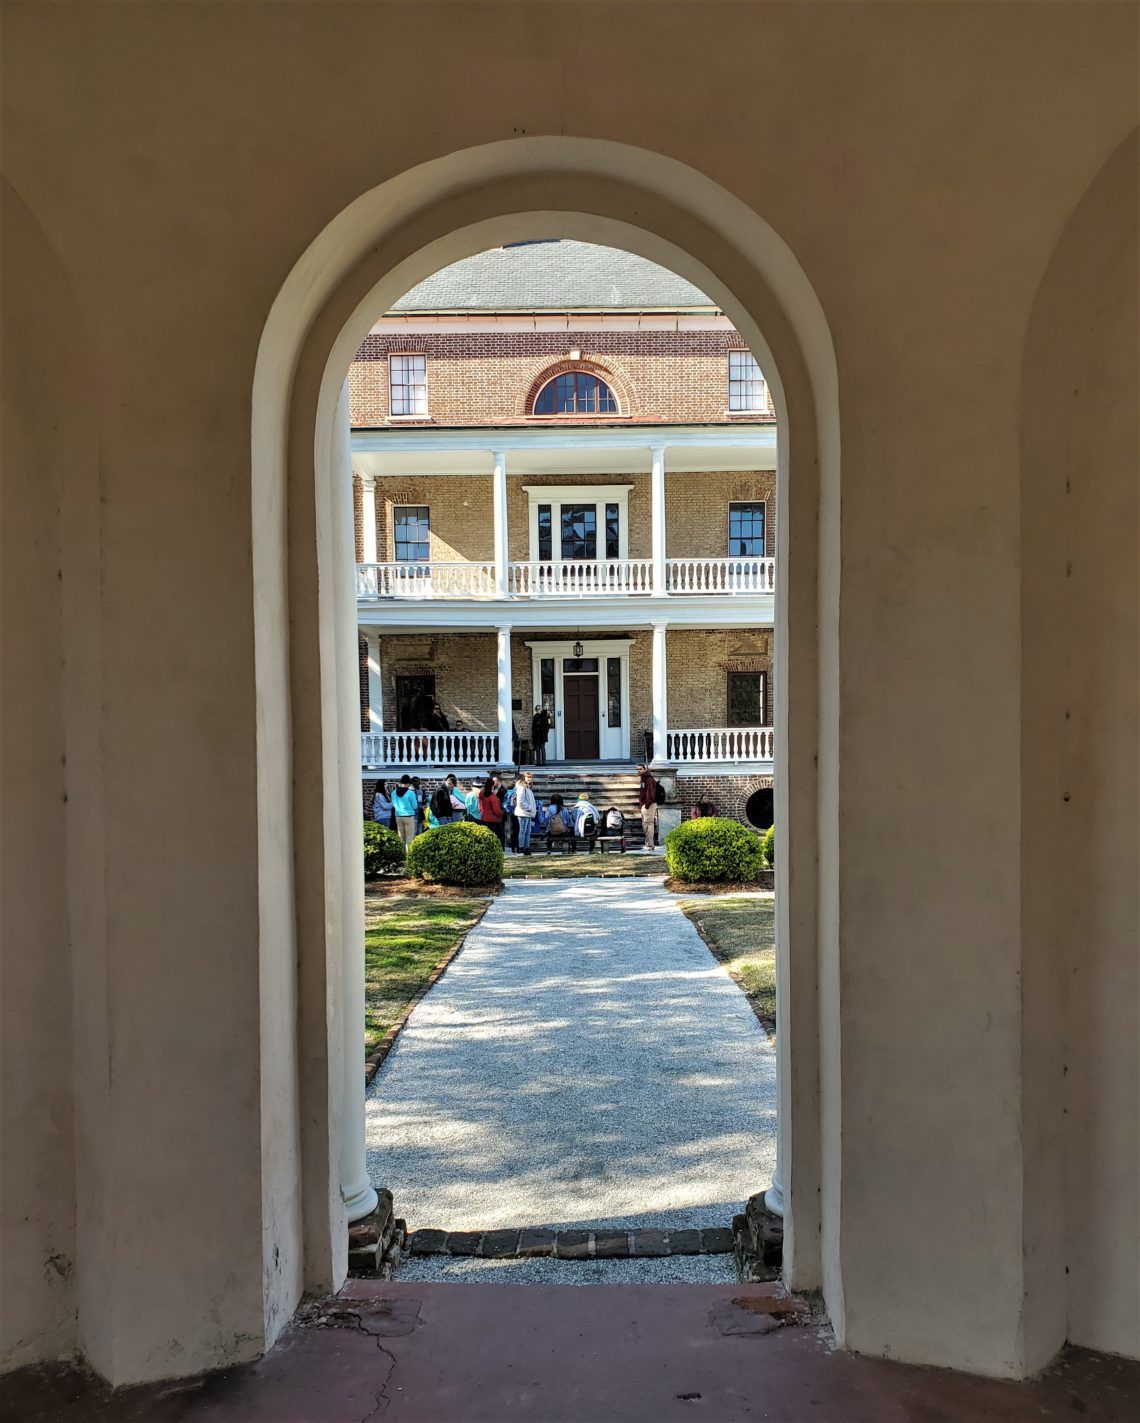 A different view of the Joseph Manigault House through the door of the garden "folly."